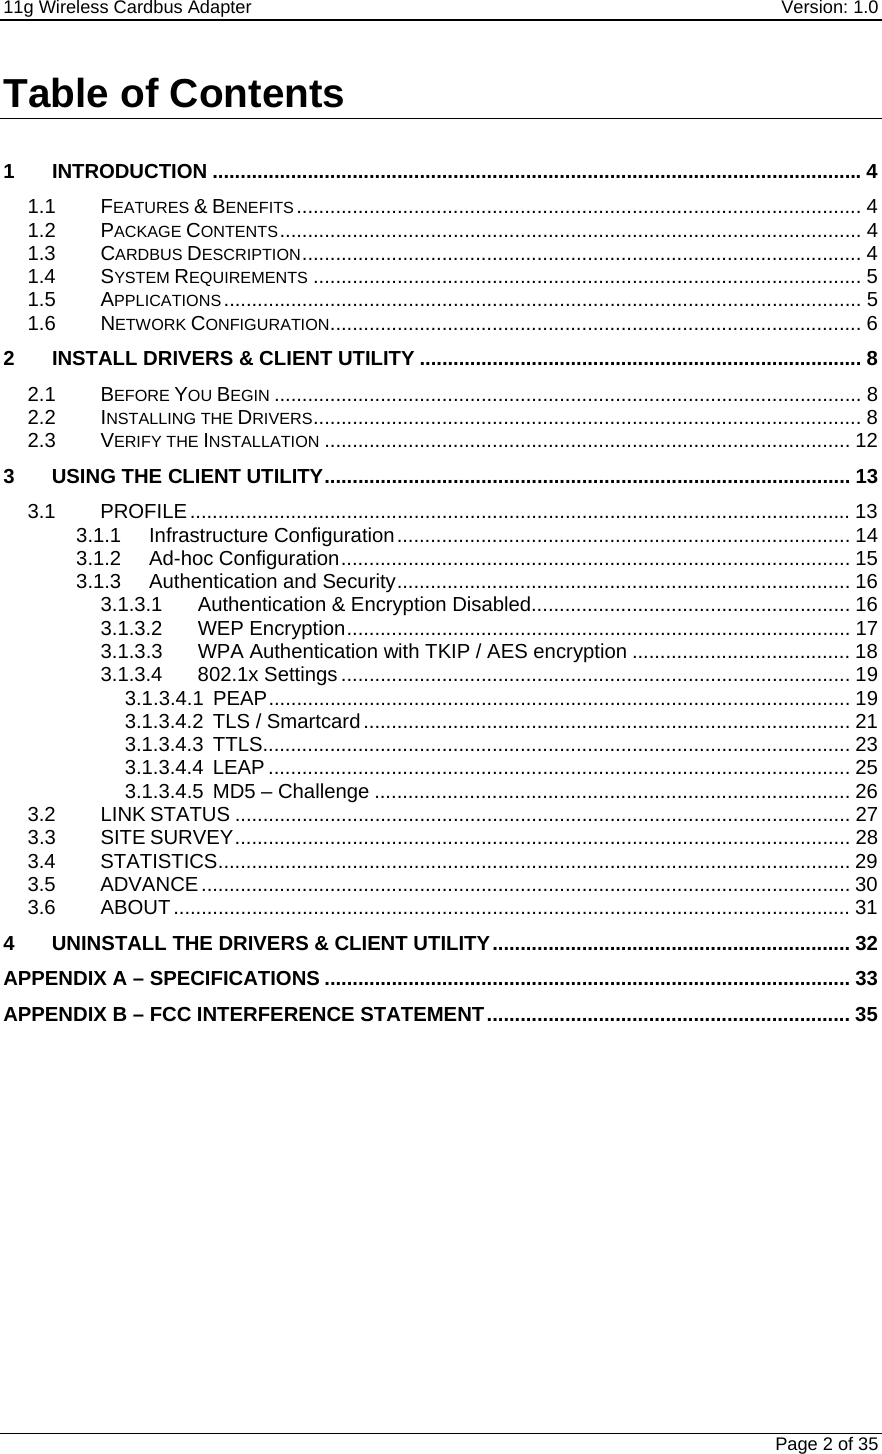 11g Wireless Cardbus Adapter    Version: 1.0   Page 2 of 35 Table of Contents  1 INTRODUCTION ....................................................................................................................4 1.1 FEATURES &amp; BENEFITS ..................................................................................................... 4 1.2 PACKAGE CONTENTS........................................................................................................ 4 1.3 CARDBUS DESCRIPTION.................................................................................................... 4 1.4 SYSTEM REQUIREMENTS .................................................................................................. 5 1.5 APPLICATIONS.................................................................................................................. 5 1.6 NETWORK CONFIGURATION............................................................................................... 6 2 INSTALL DRIVERS &amp; CLIENT UTILITY ............................................................................... 8 2.1 BEFORE YOU BEGIN ......................................................................................................... 8 2.2 INSTALLING THE DRIVERS.................................................................................................. 8 2.3 VERIFY THE INSTALLATION .............................................................................................. 12 3 USING THE CLIENT UTILITY.............................................................................................. 13 3.1 PROFILE...................................................................................................................... 13 3.1.1 Infrastructure Configuration................................................................................. 14 3.1.2 Ad-hoc Configuration........................................................................................... 15 3.1.3 Authentication and Security................................................................................. 16 3.1.3.1  Authentication &amp; Encryption Disabled......................................................... 16 3.1.3.2 WEP Encryption.......................................................................................... 17 3.1.3.3  WPA Authentication with TKIP / AES encryption ....................................... 18 3.1.3.4 802.1x Settings ........................................................................................... 19 3.1.3.4.1 PEAP........................................................................................................ 19 3.1.3.4.2  TLS / Smartcard....................................................................................... 21 3.1.3.4.3 TTLS......................................................................................................... 23 3.1.3.4.4 LEAP ........................................................................................................ 25 3.1.3.4.5 MD5 – Challenge ..................................................................................... 26 3.2 LINK STATUS .............................................................................................................. 27 3.3 SITE SURVEY.............................................................................................................. 28 3.4 STATISTICS................................................................................................................. 29 3.5 ADVANCE.................................................................................................................... 30 3.6 ABOUT......................................................................................................................... 31 4 UNINSTALL THE DRIVERS &amp; CLIENT UTILITY................................................................ 32 APPENDIX A – SPECIFICATIONS .............................................................................................. 33 APPENDIX B – FCC INTERFERENCE STATEMENT................................................................. 35            